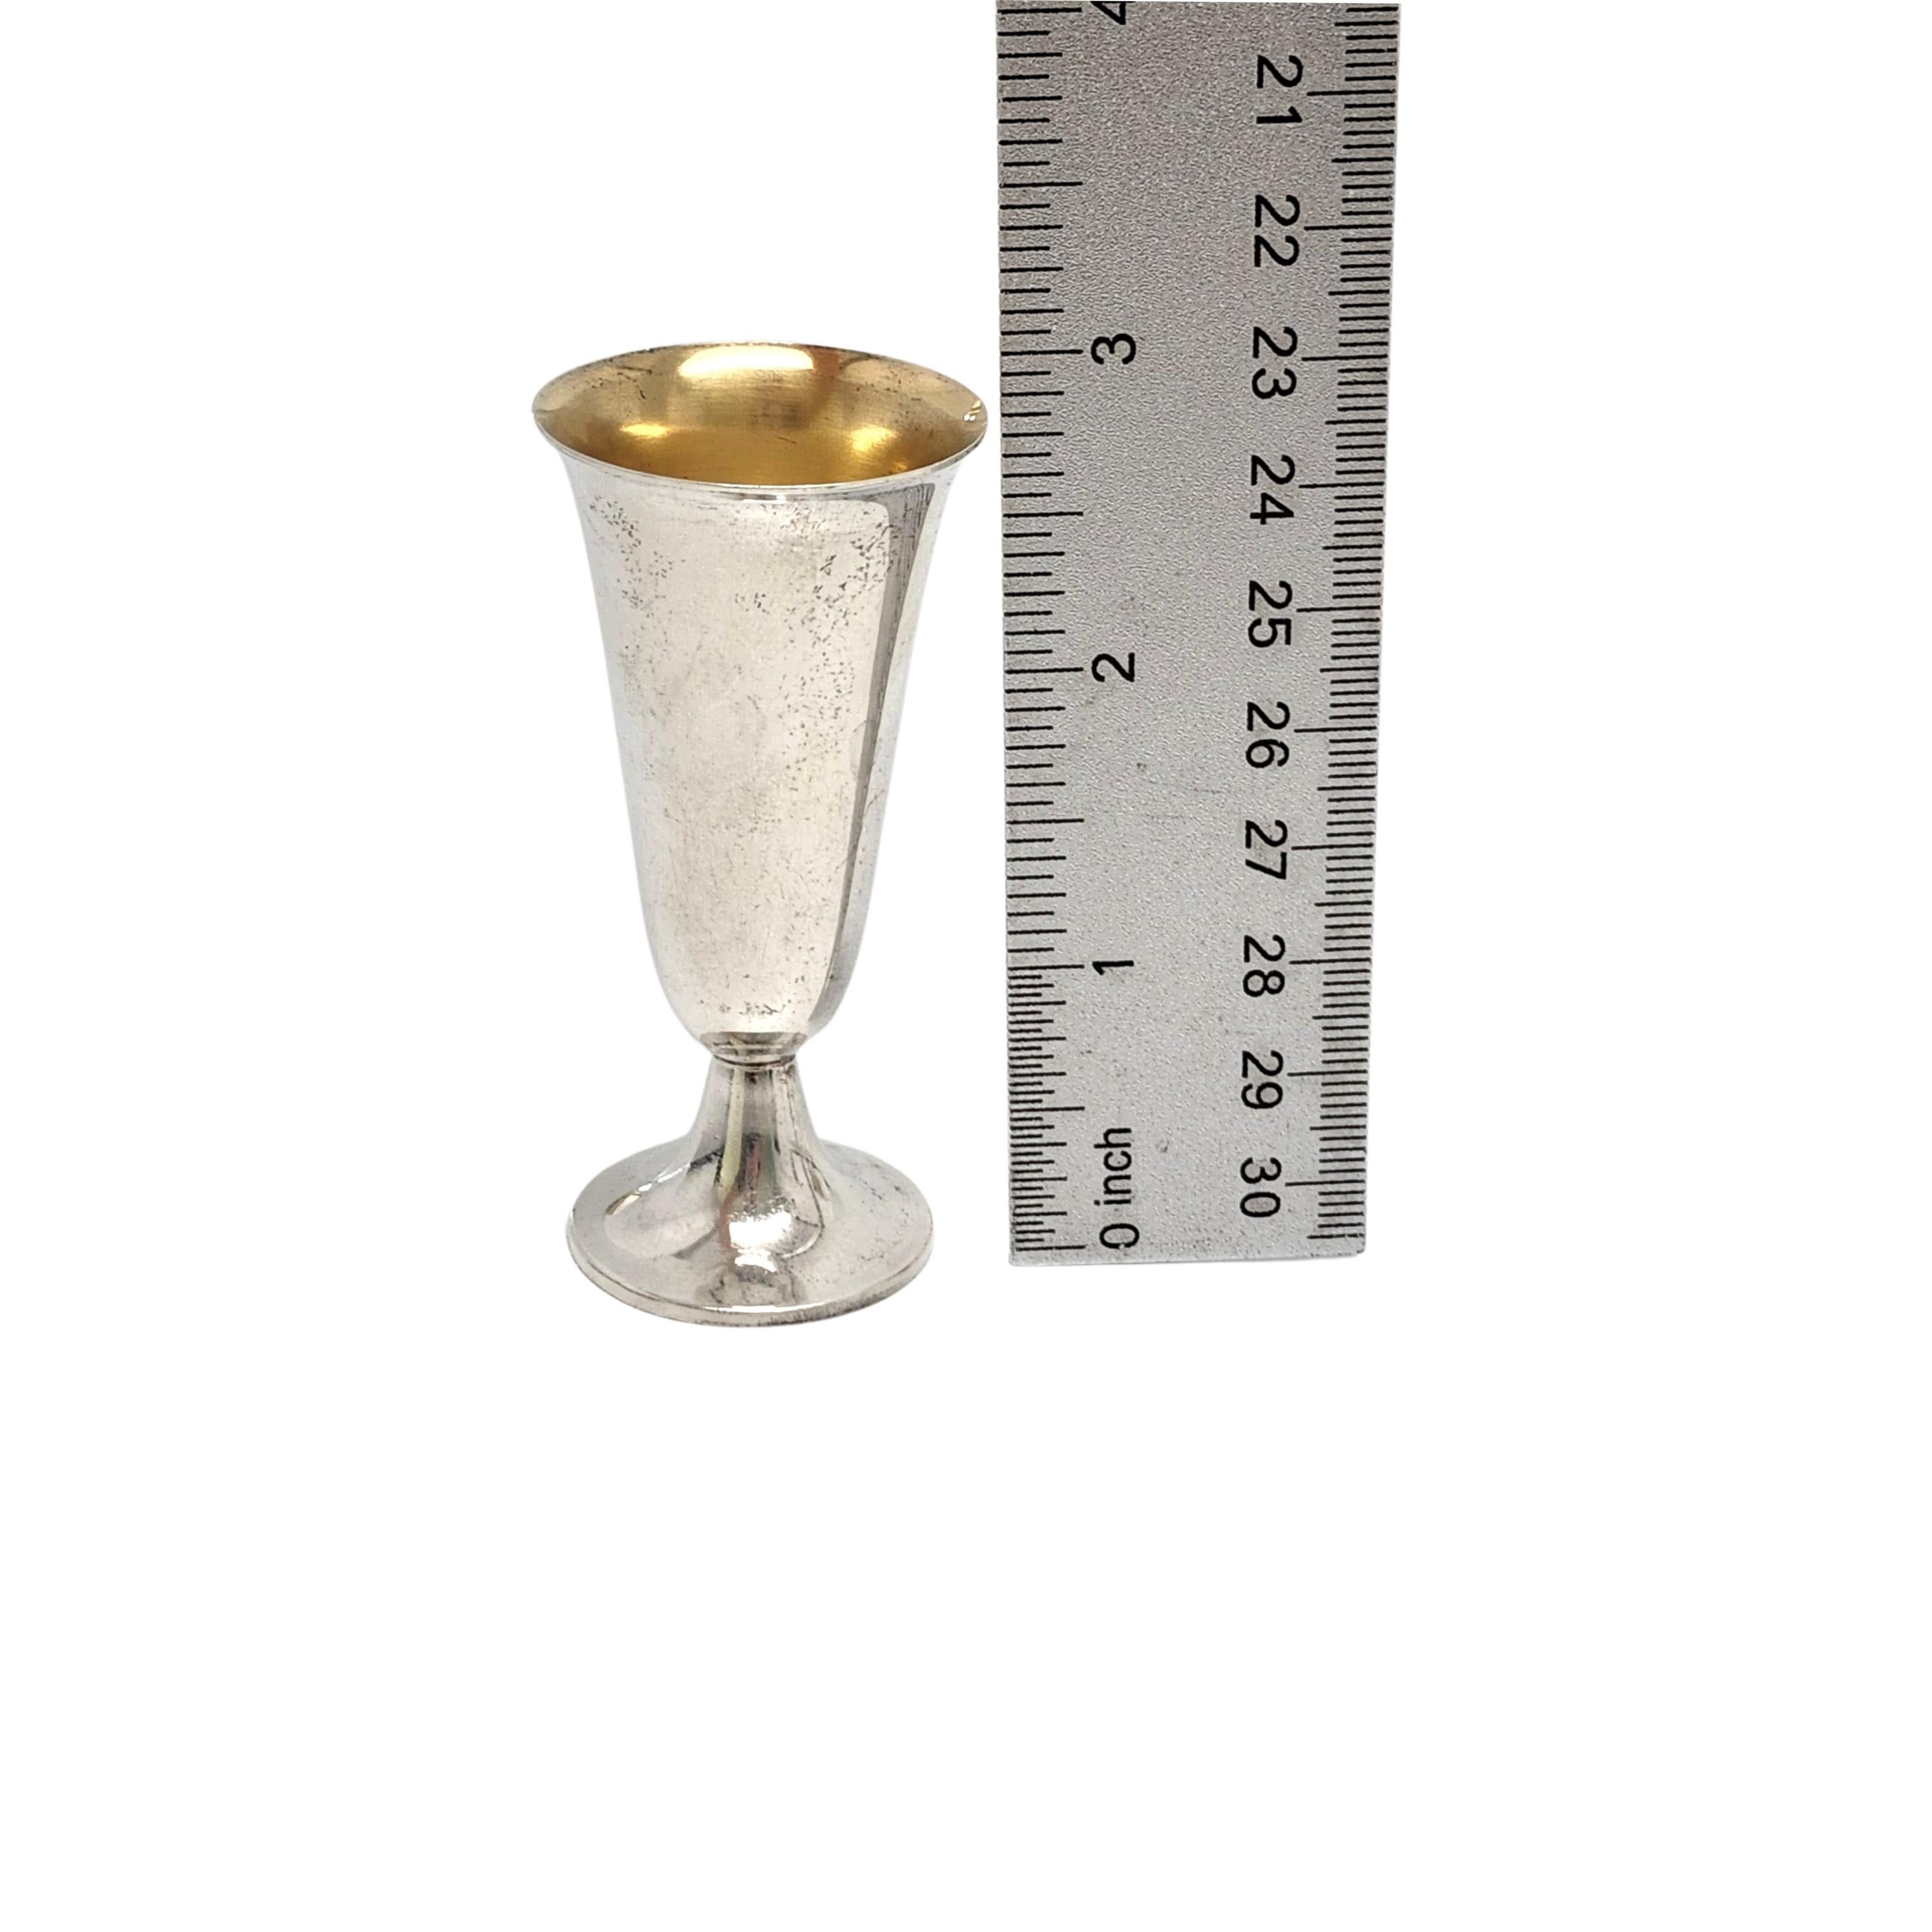 Set of 4 sterling silver with gold wash interior cordial/shot cups by Tiffany & Co.

Simple and timeless elongated goblet design with bright gold wash interior. The L hallmark dates this pieces to manufacture under the directorship of William T